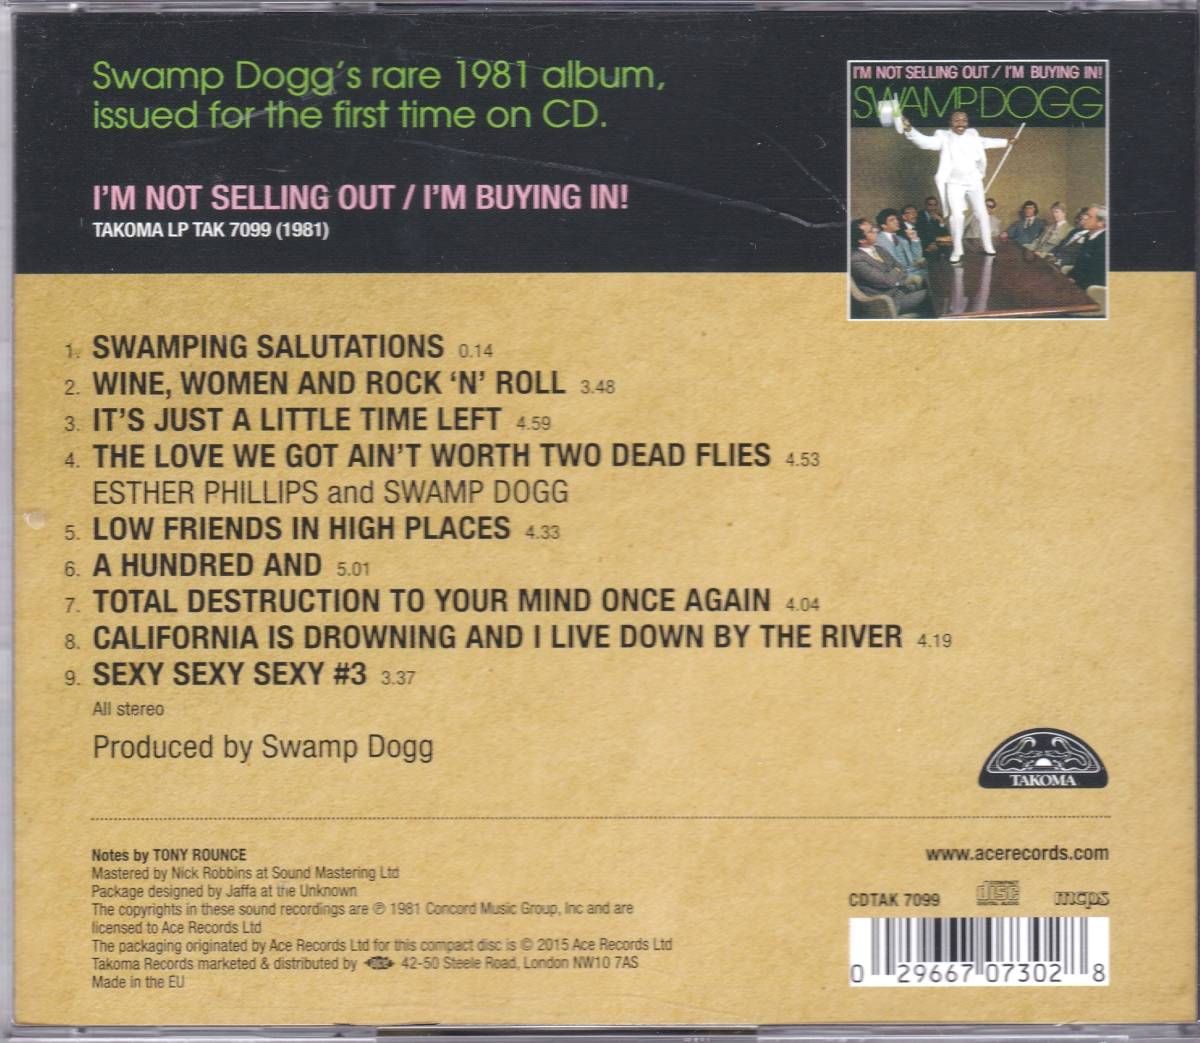 ☆SWAMP DOGG(スワンプ・ドッグ)/I’m Not Selling Out/I’m Buying In!◆81年リリースのEsther Phillips参加の超大名盤◇初CD化＆正規盤_画像2